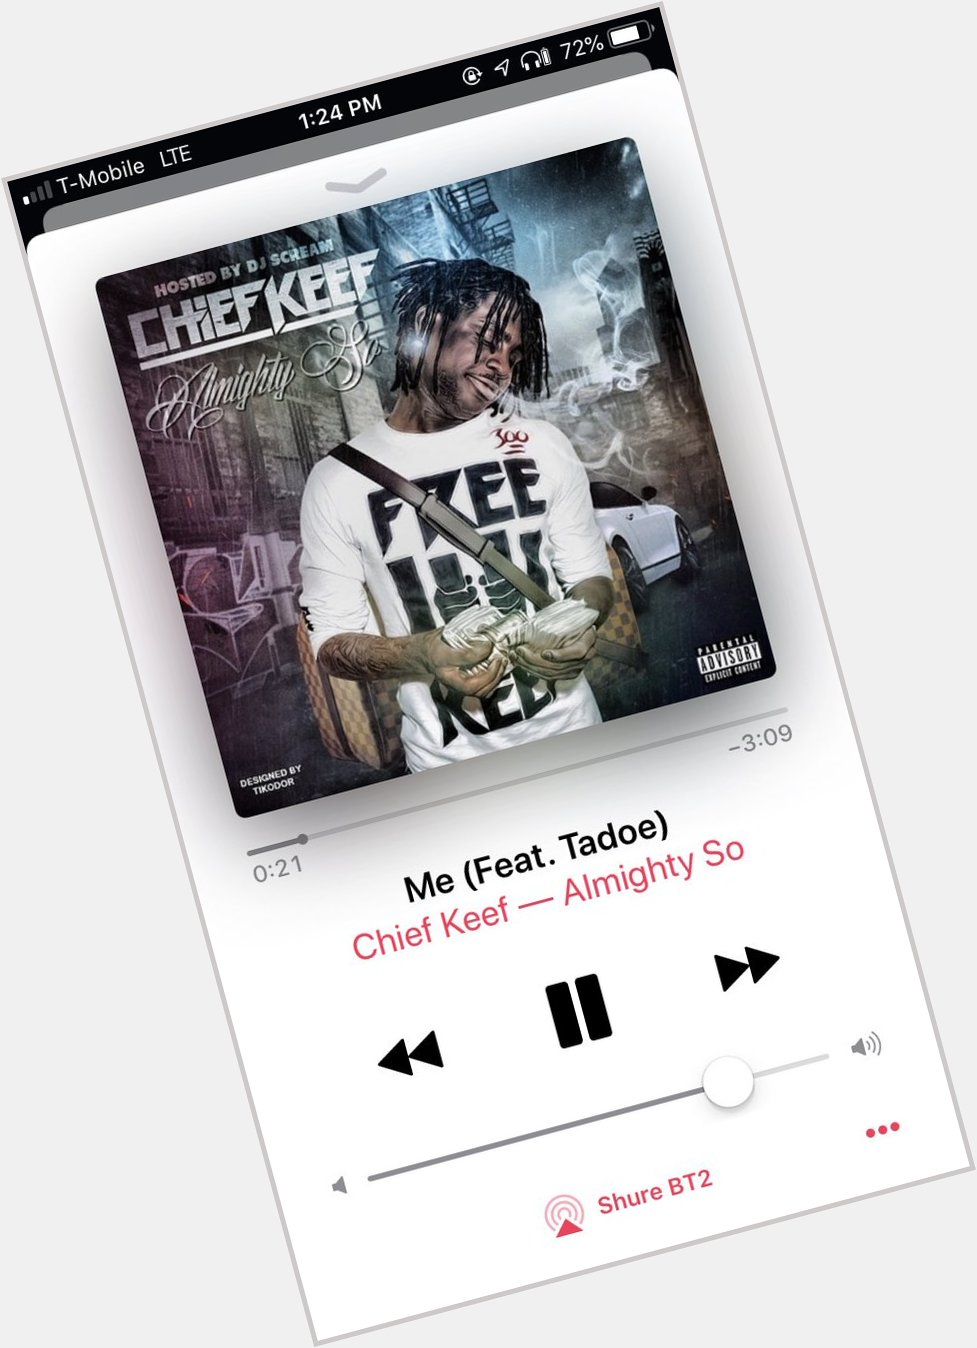 Happy birthday chief keef like this message to say happy birthday to him too (it s the ONLY way) 